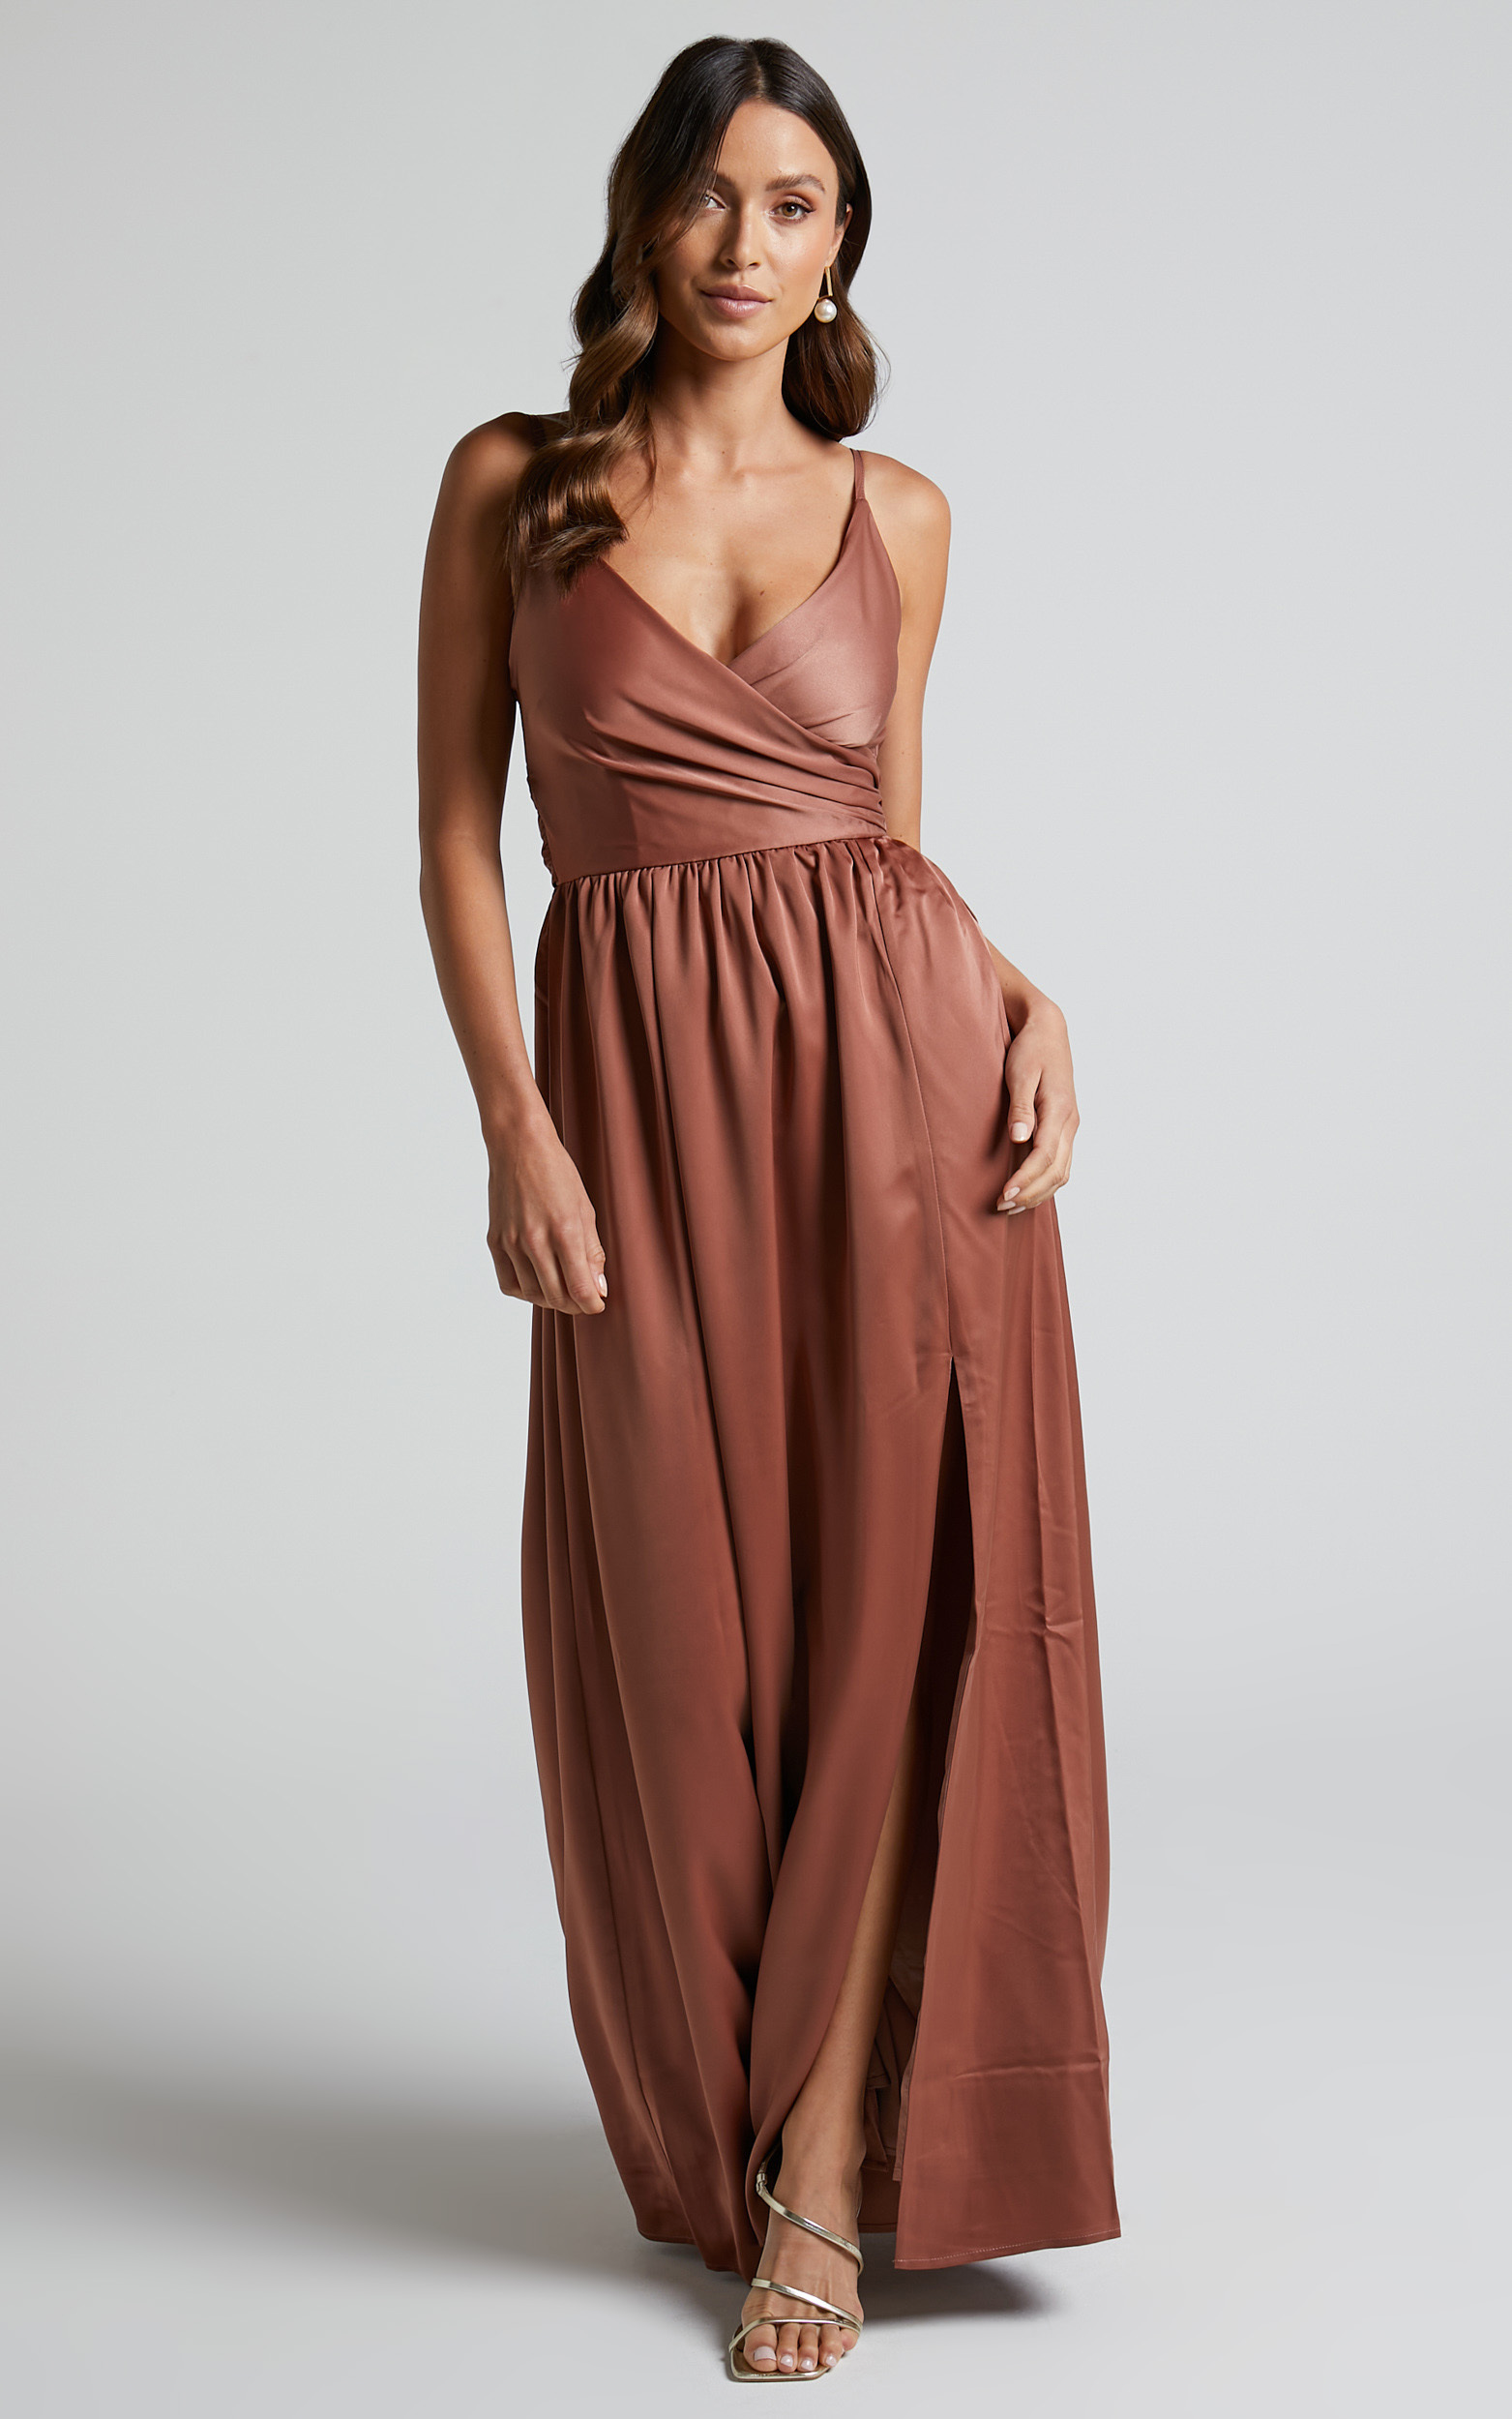 Revolve Around Me Dress in Dusty Rose - 04, PNK2, hi-res image number null